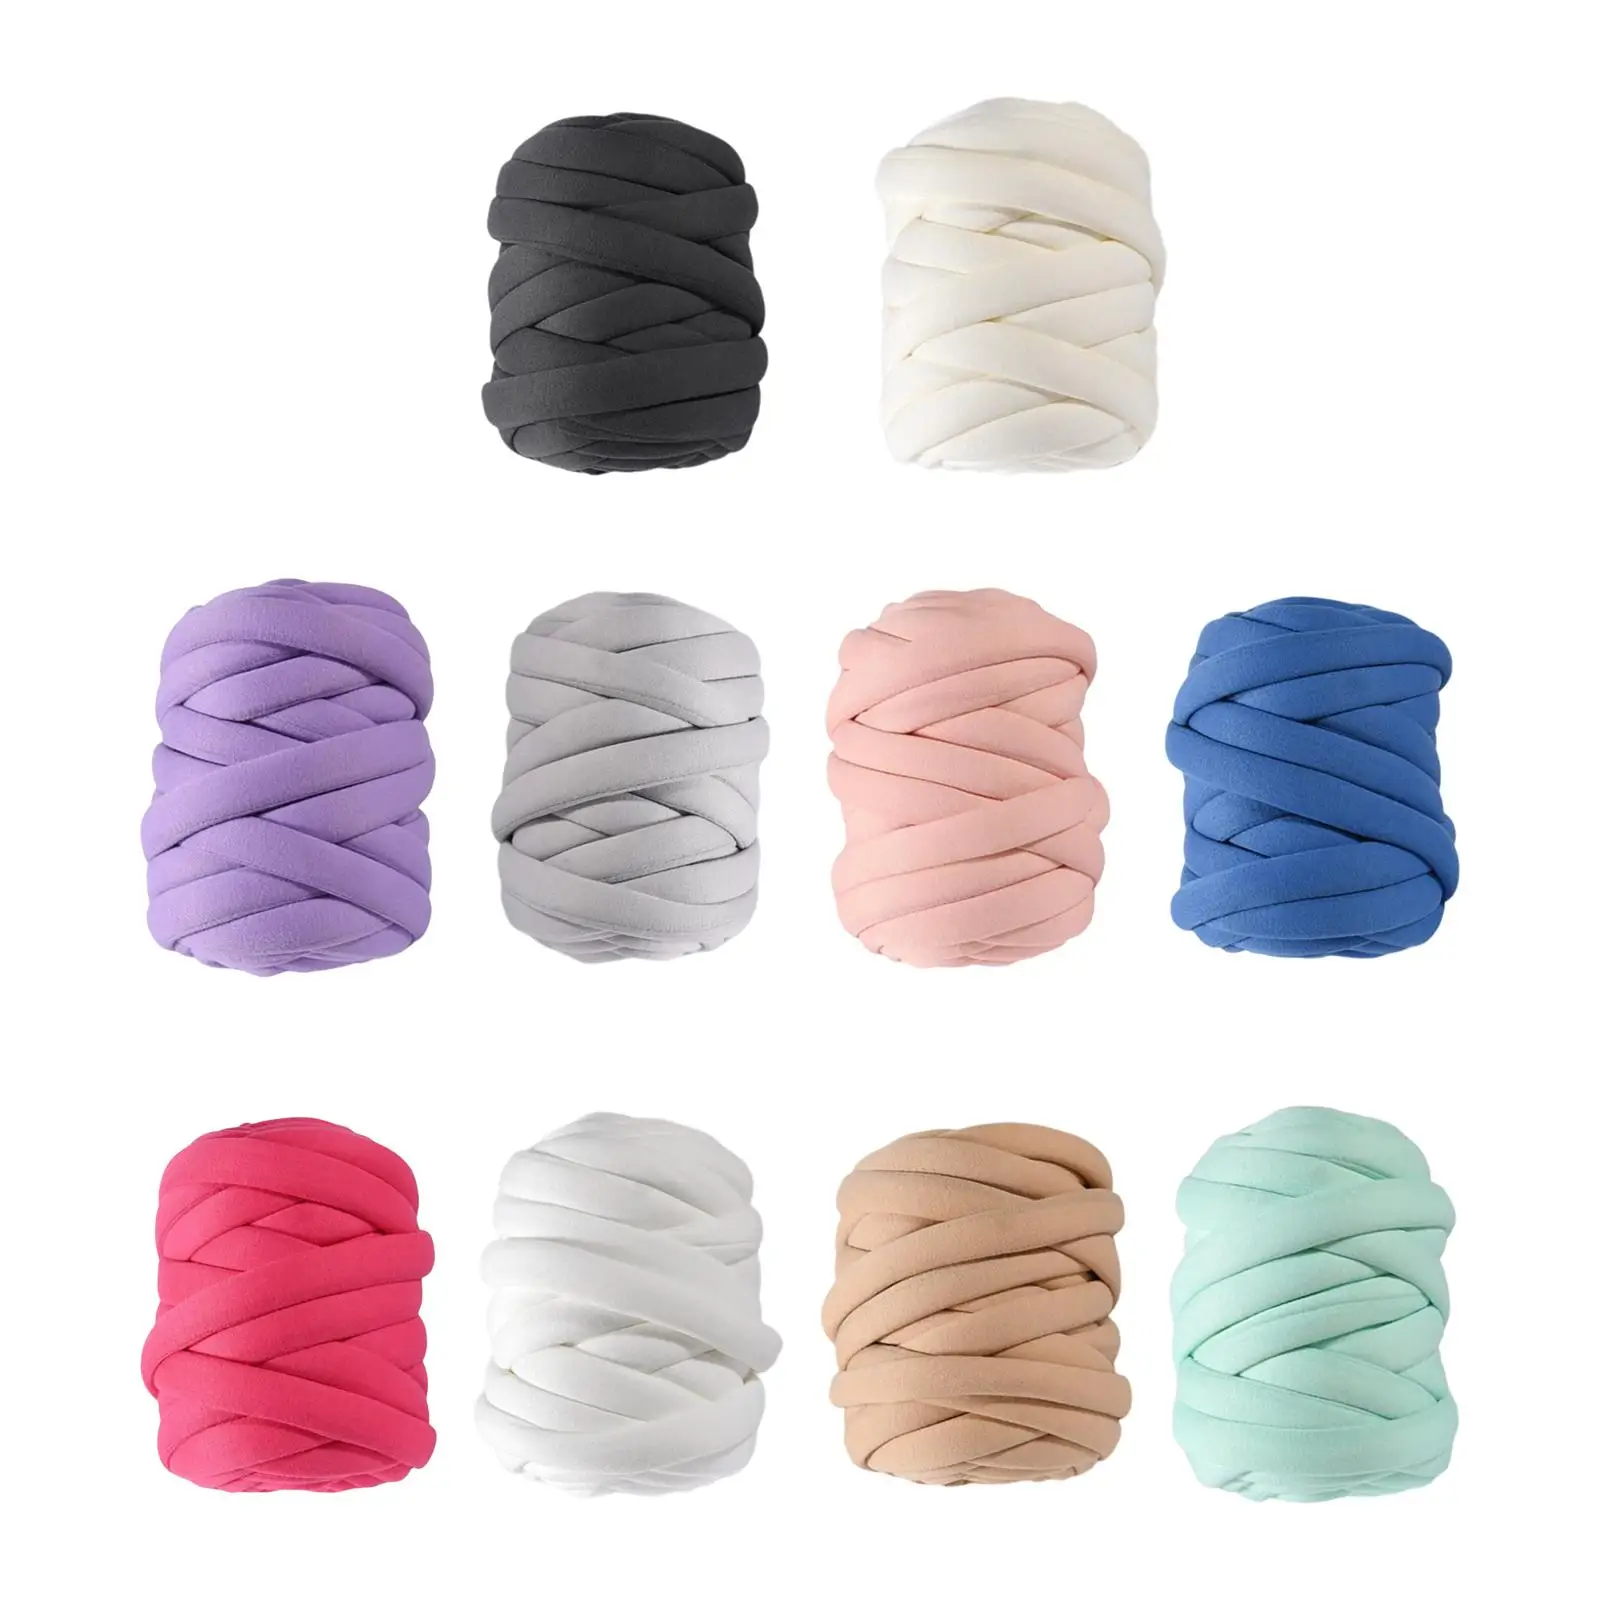 250G/0.55lbs Chunky Yarn Thick for Braided Knot Pet Bed and Bed Fence Craft